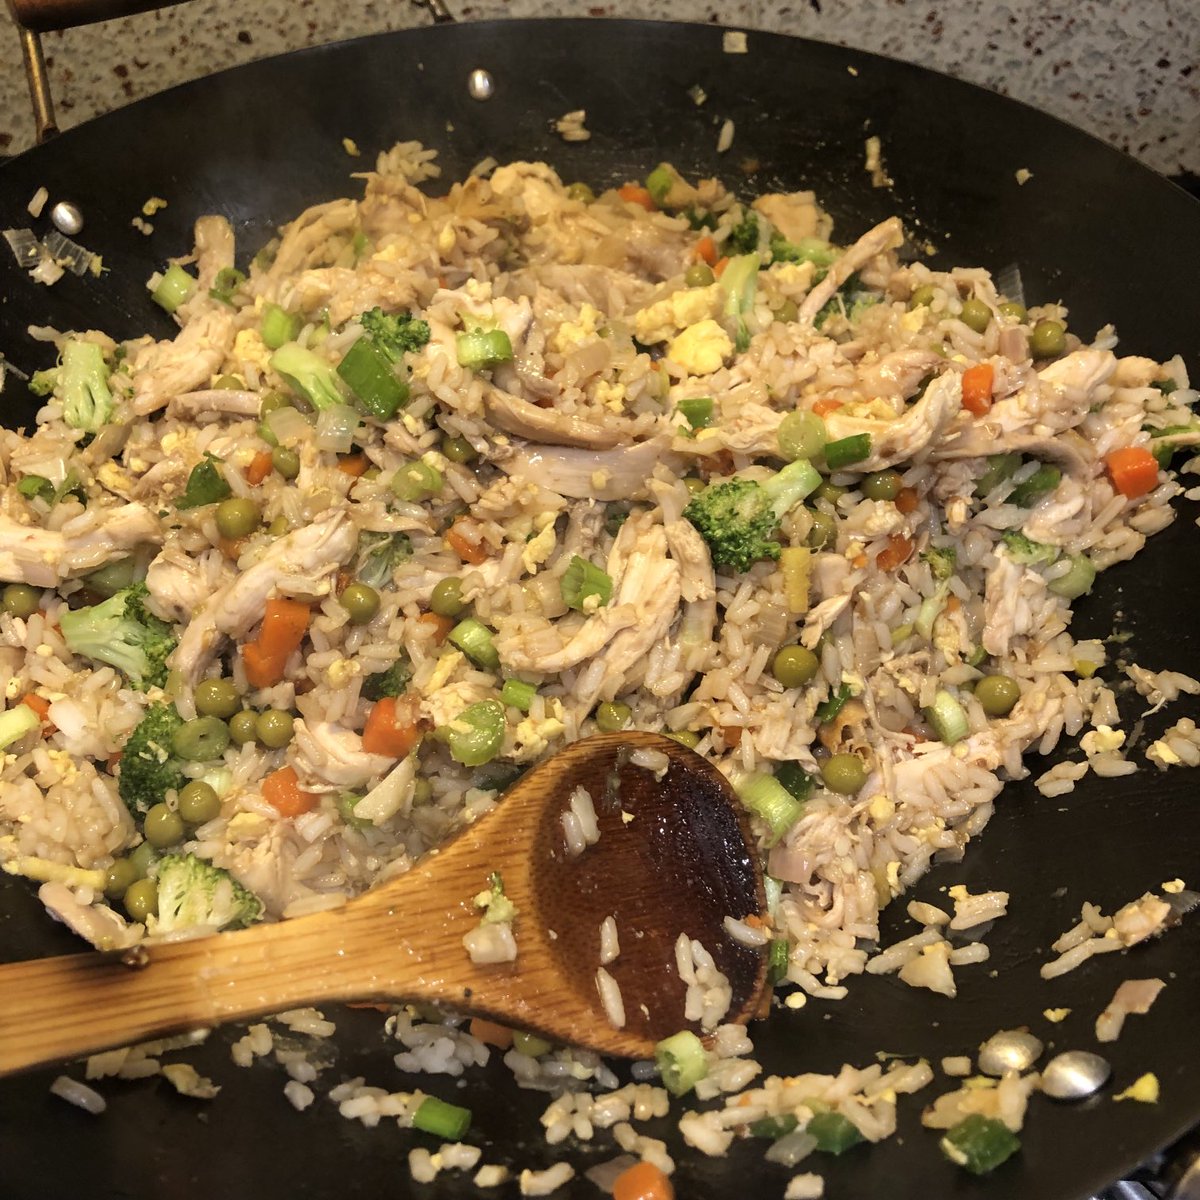 Chicken fried rice. I’ve already had 3 servings. Trying to figure out which hot sauce goes best with it.